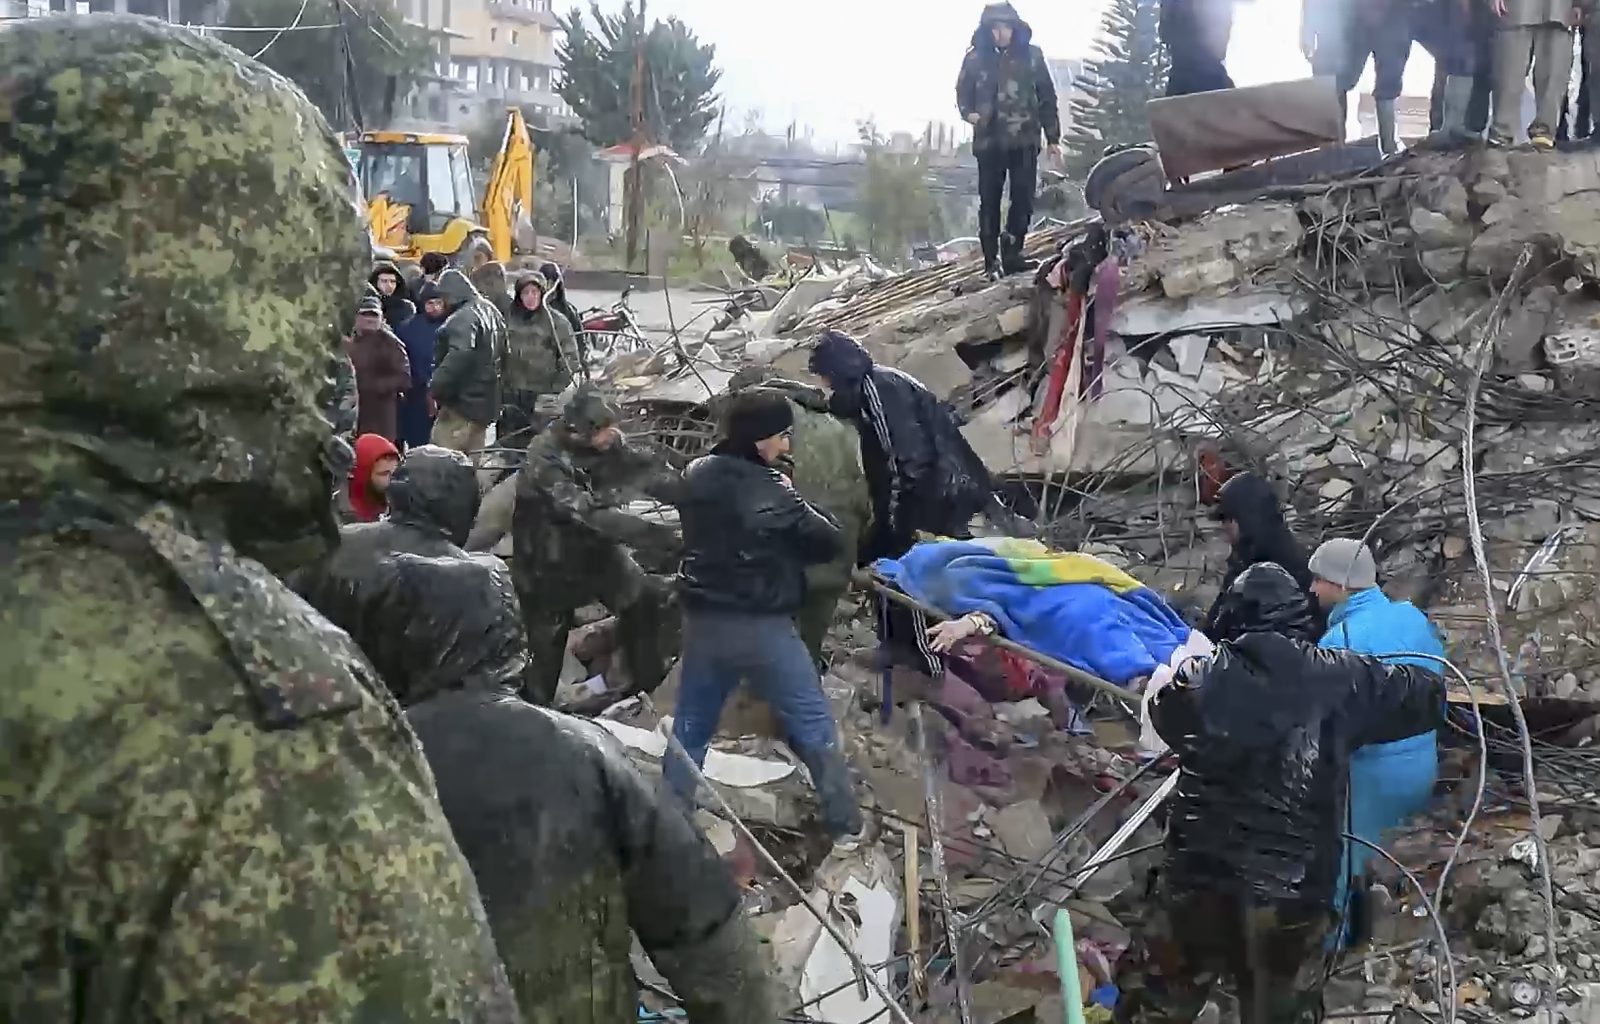 epa10452104 A still image taken from a handout video provided by the Russian Defence Ministry Press-Service on 07 February 2023 shows Syrian and Russian servicemen helping locals carrying the body of a victim found at the site of a collapsed building after a major earthquake in Latakia, Syria. More than 4,000 people were killed and thousands more injured after a major 7.8 magnitude earthquake struck southern Turkey and northern Syria on 06 February. Authorities fear the death toll will keep climbing as rescuers look for survivors across the region.  EPA/RUSSIAN DEFENCE MINISTRY PRESS SERVICE HANDOUT -- BEST QUALITY AVAILABLE -- MANDATORY CREDIT -- HANDOUT EDITORIAL USE ONLY/NO SALES